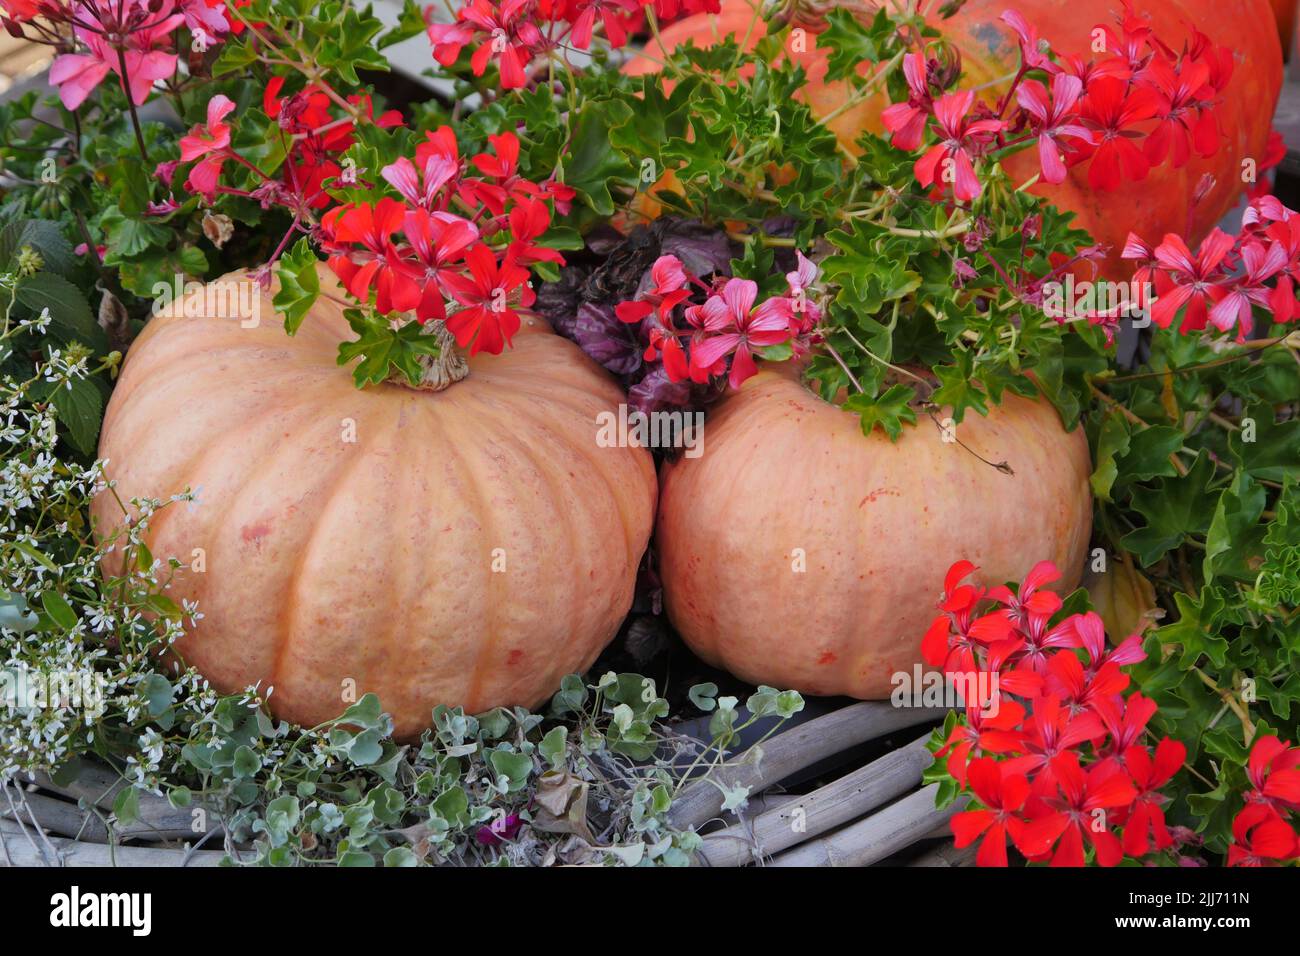 Round, spherical orange-colored pumpkin fruits in a decorative setting with wooden trunks, red flowered hanging geraniums. Pumpkins have a double use, Stock Photo